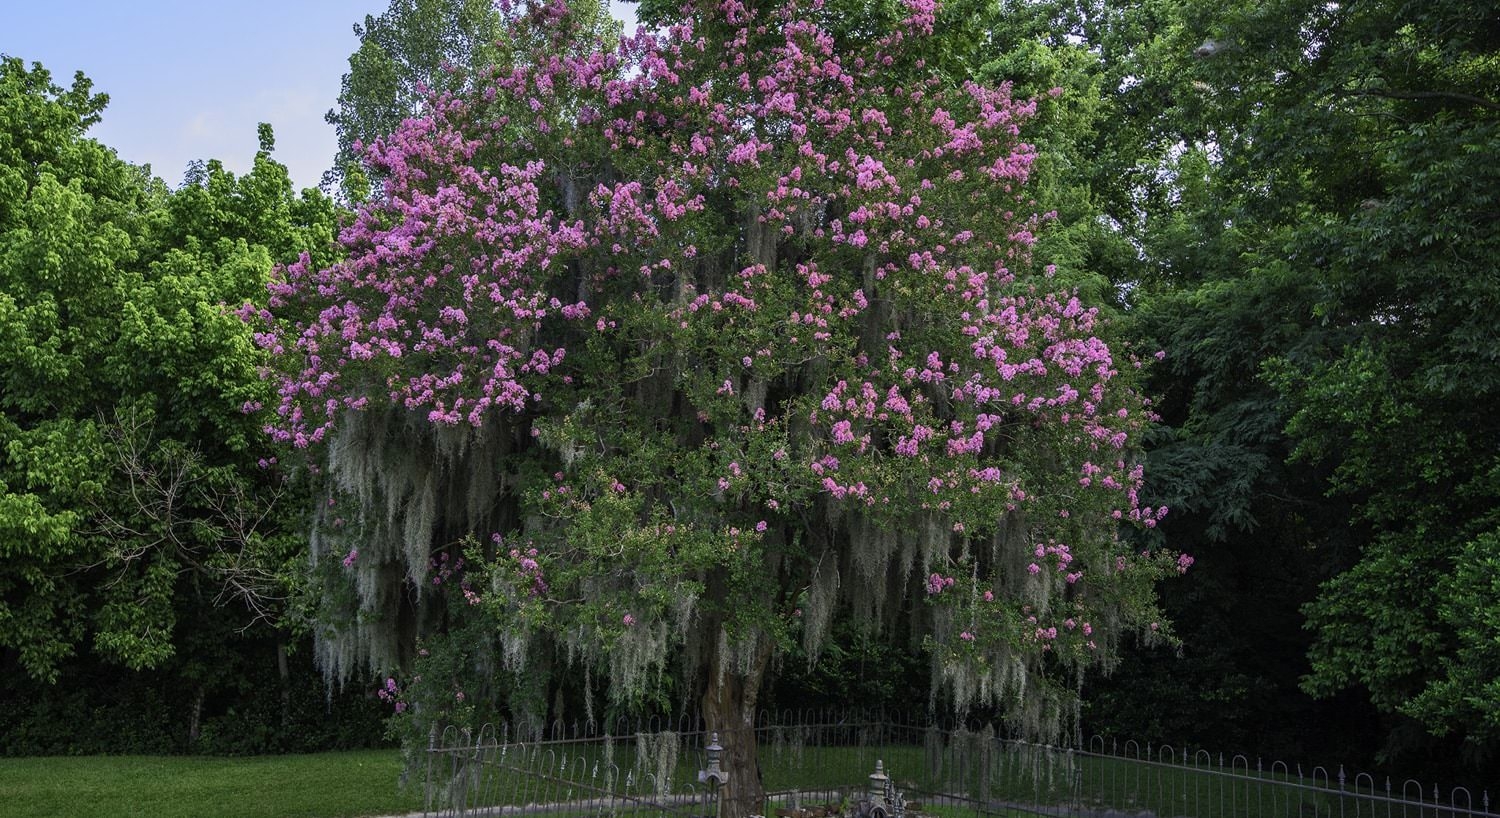 Weeping willow tree with violet flowers and a bright blue sky